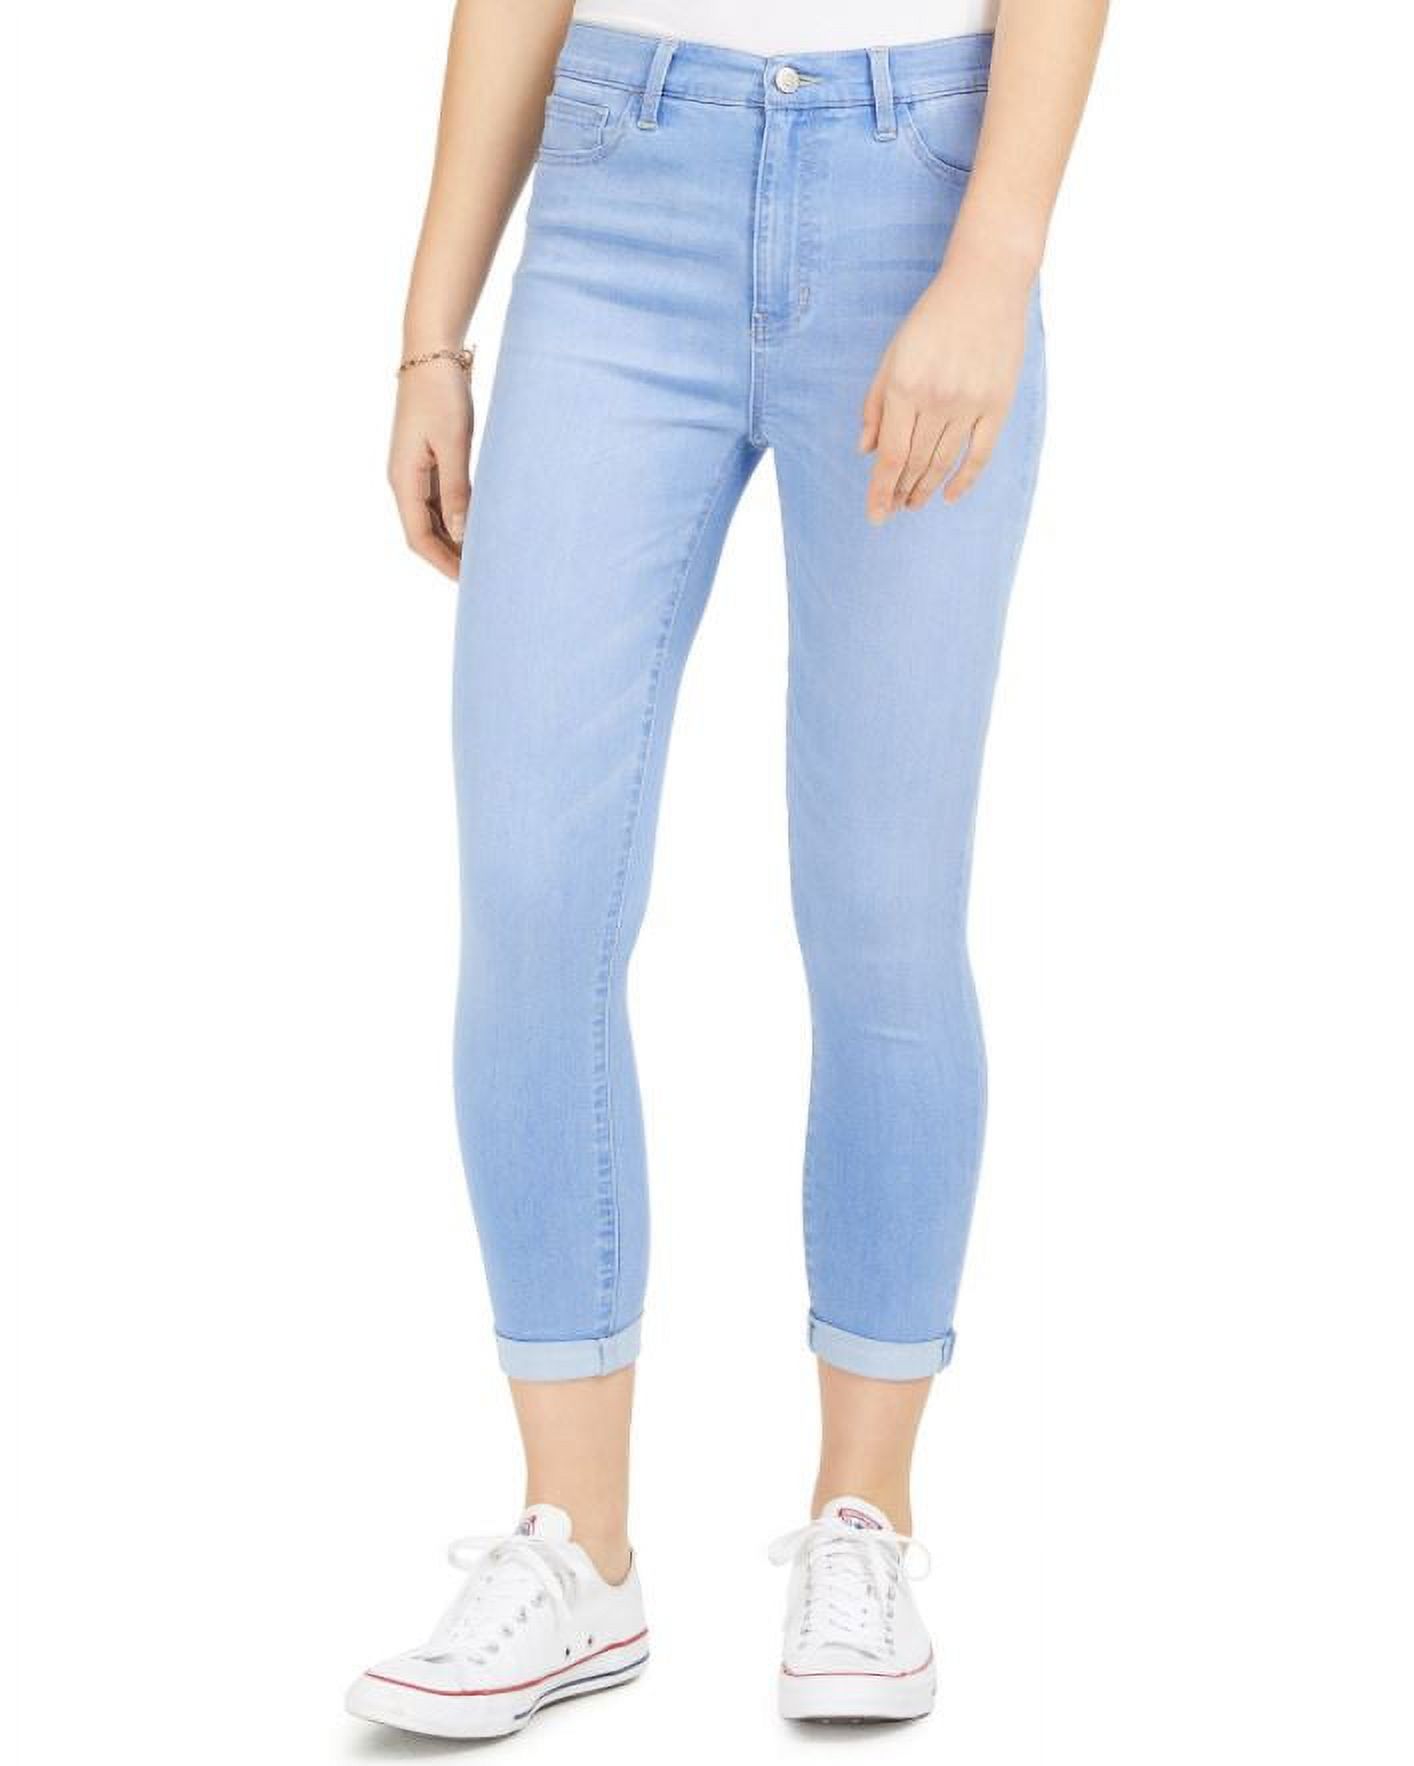 Celebrity Pink Girl's Blue Curvy Cuffed High-Rise Cropped Jeans, 0/24 - image 1 of 5